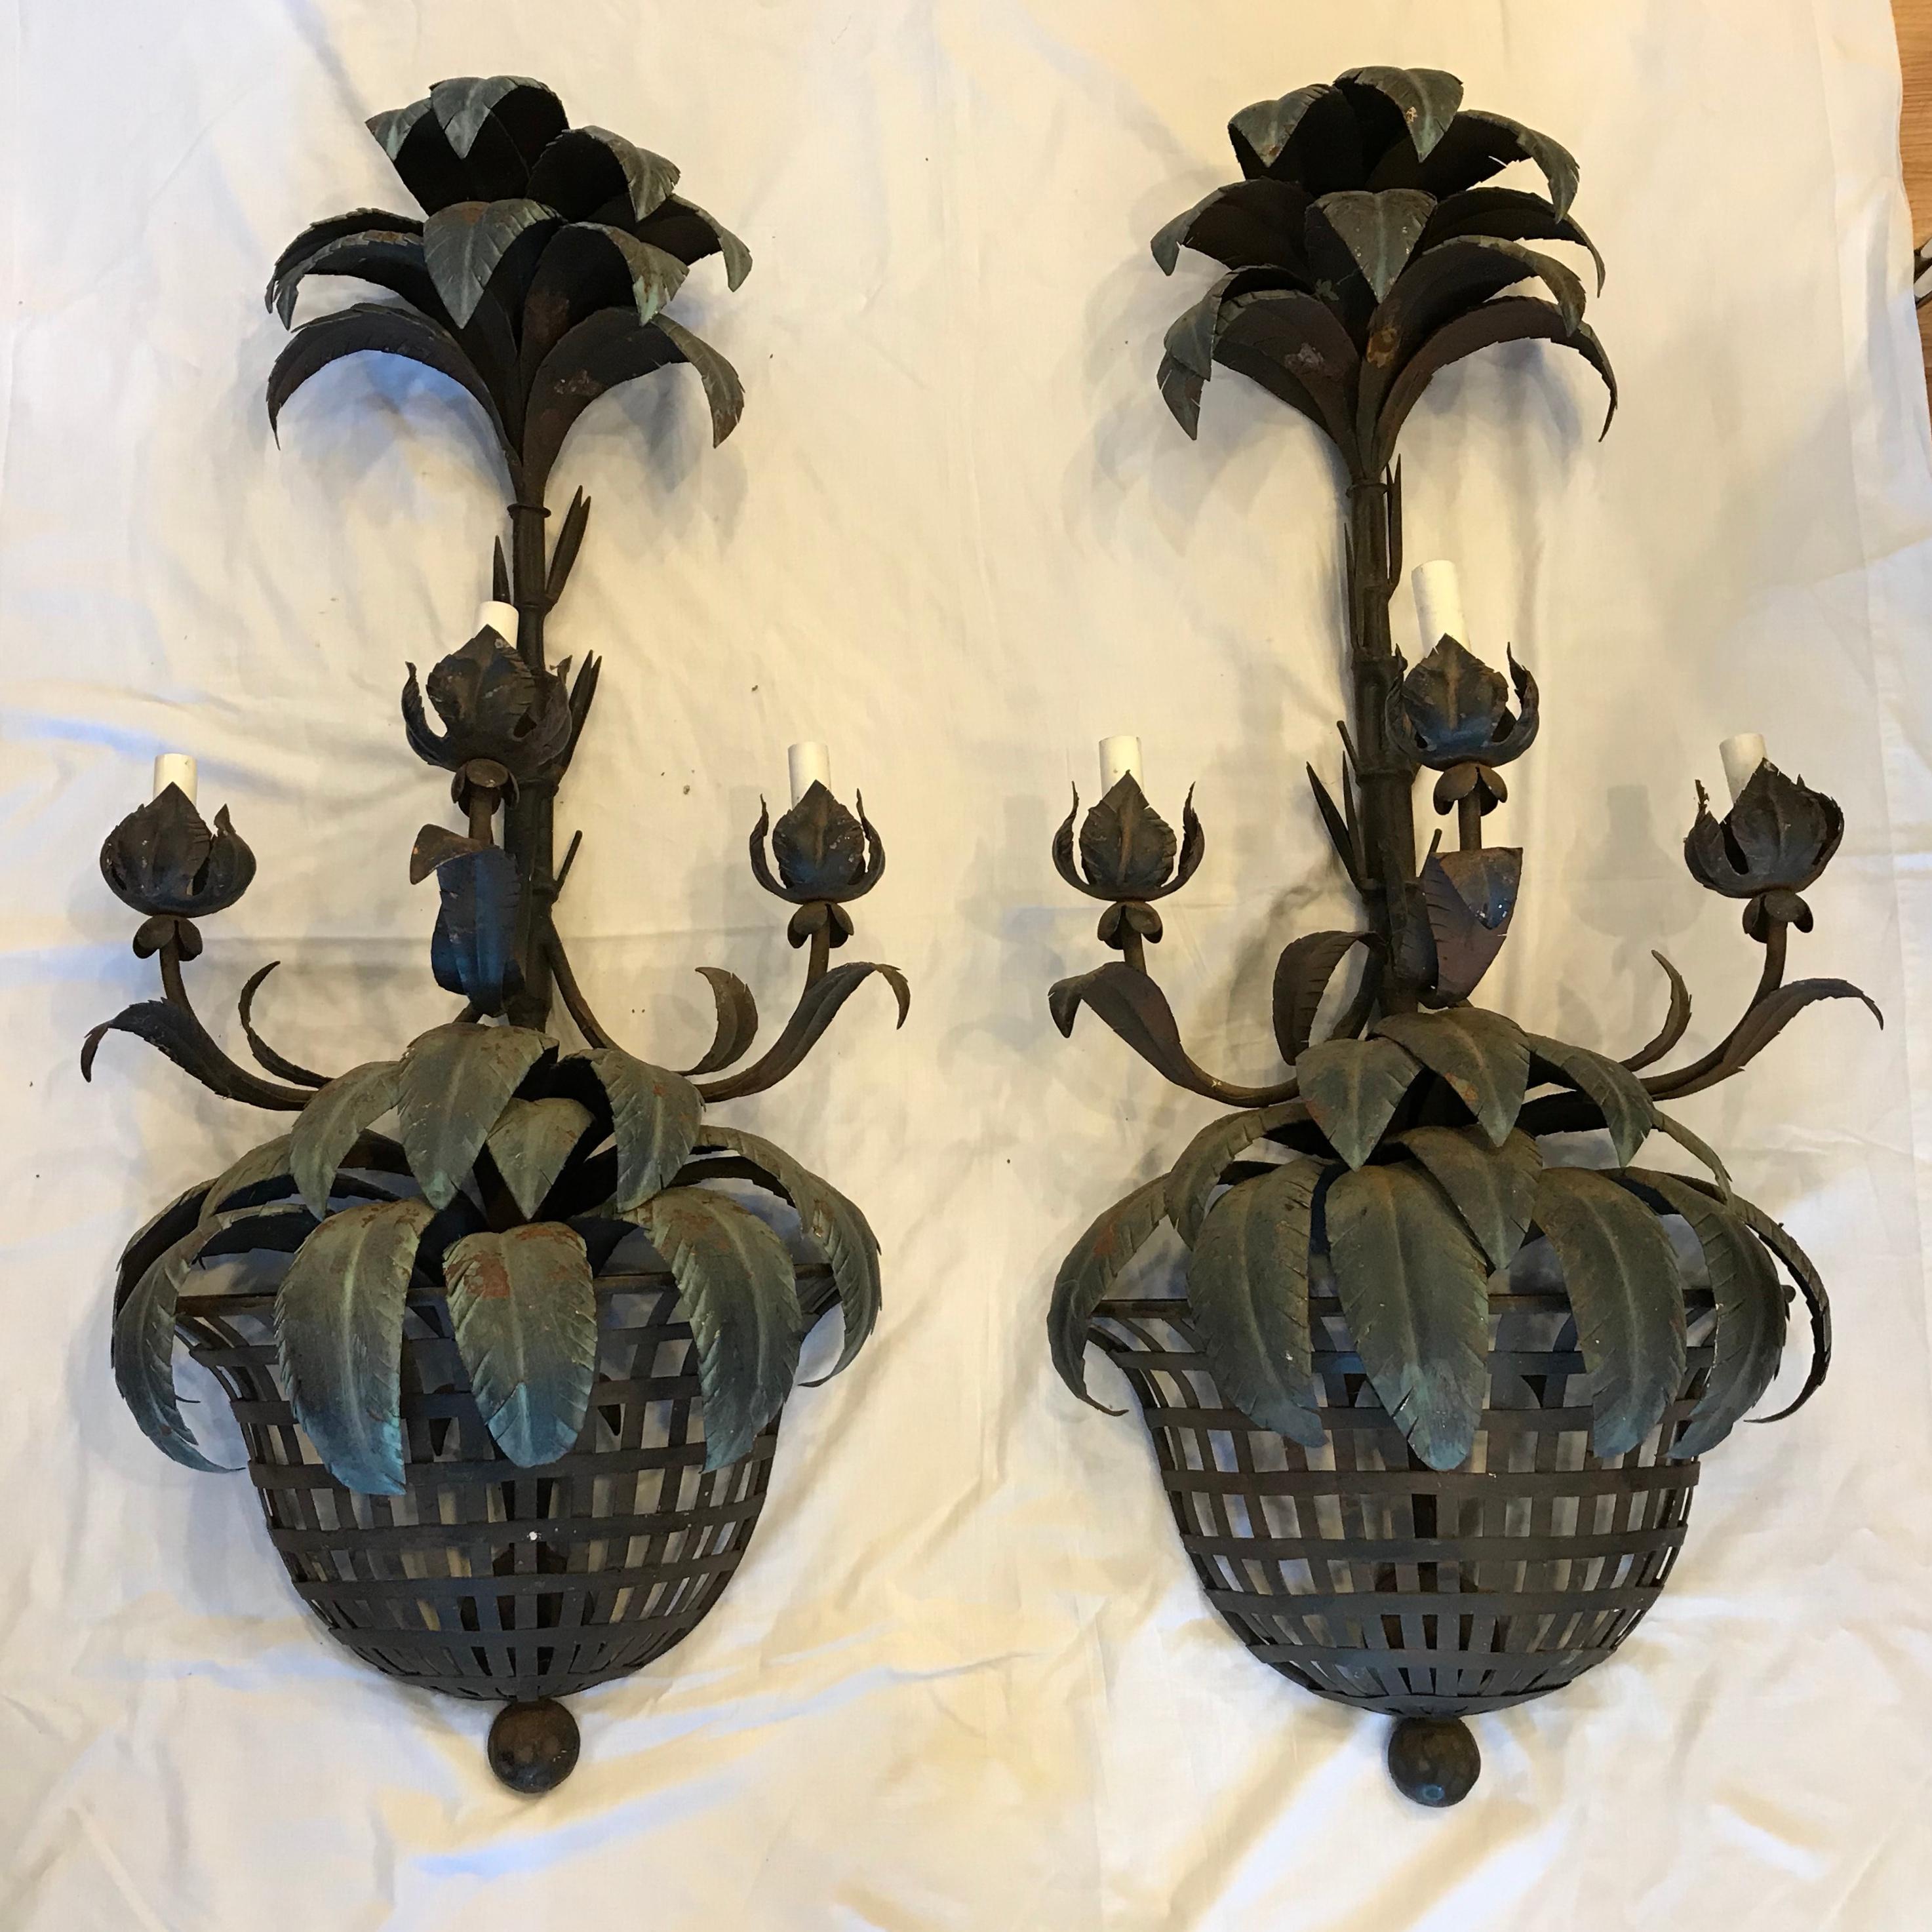 Old Palm Beach sconces removed from a loggia of a grand old house.
Weathered painted metal finish.
Dramatic in style, scale, and proportions. Electrified.